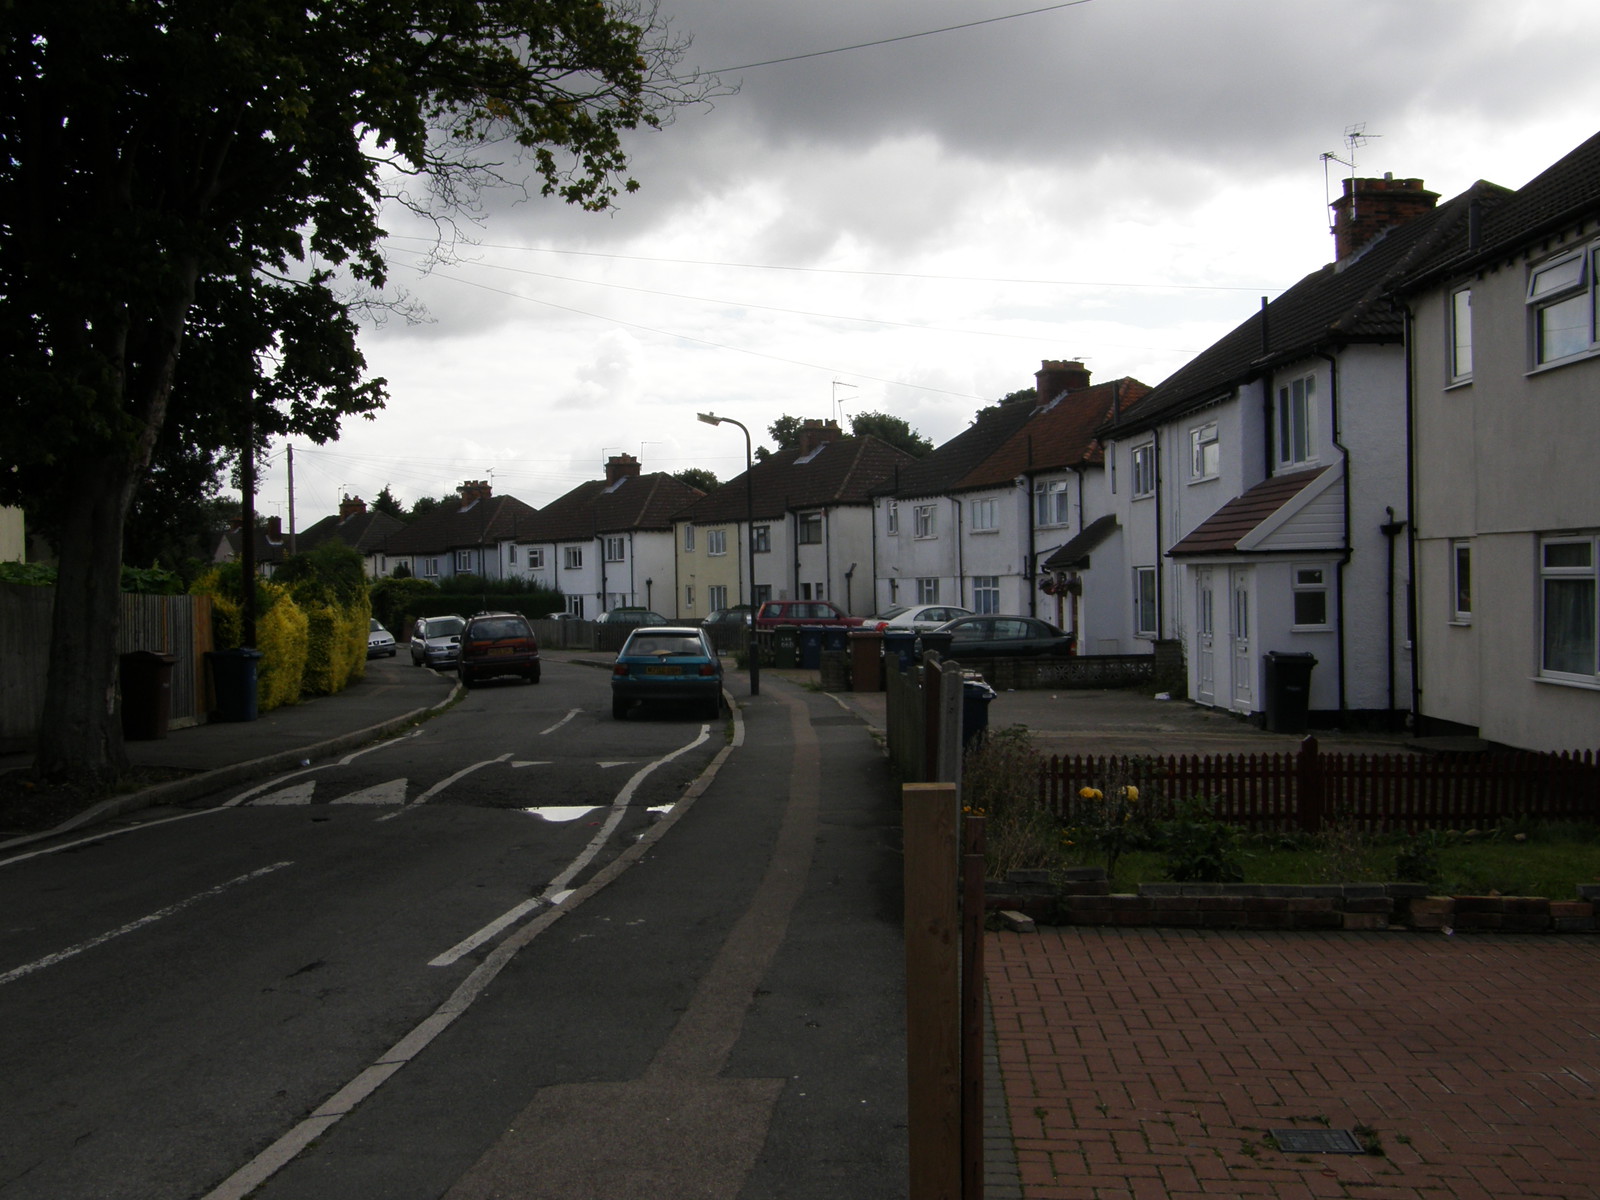 Image from Stanmore to Dollis Hill